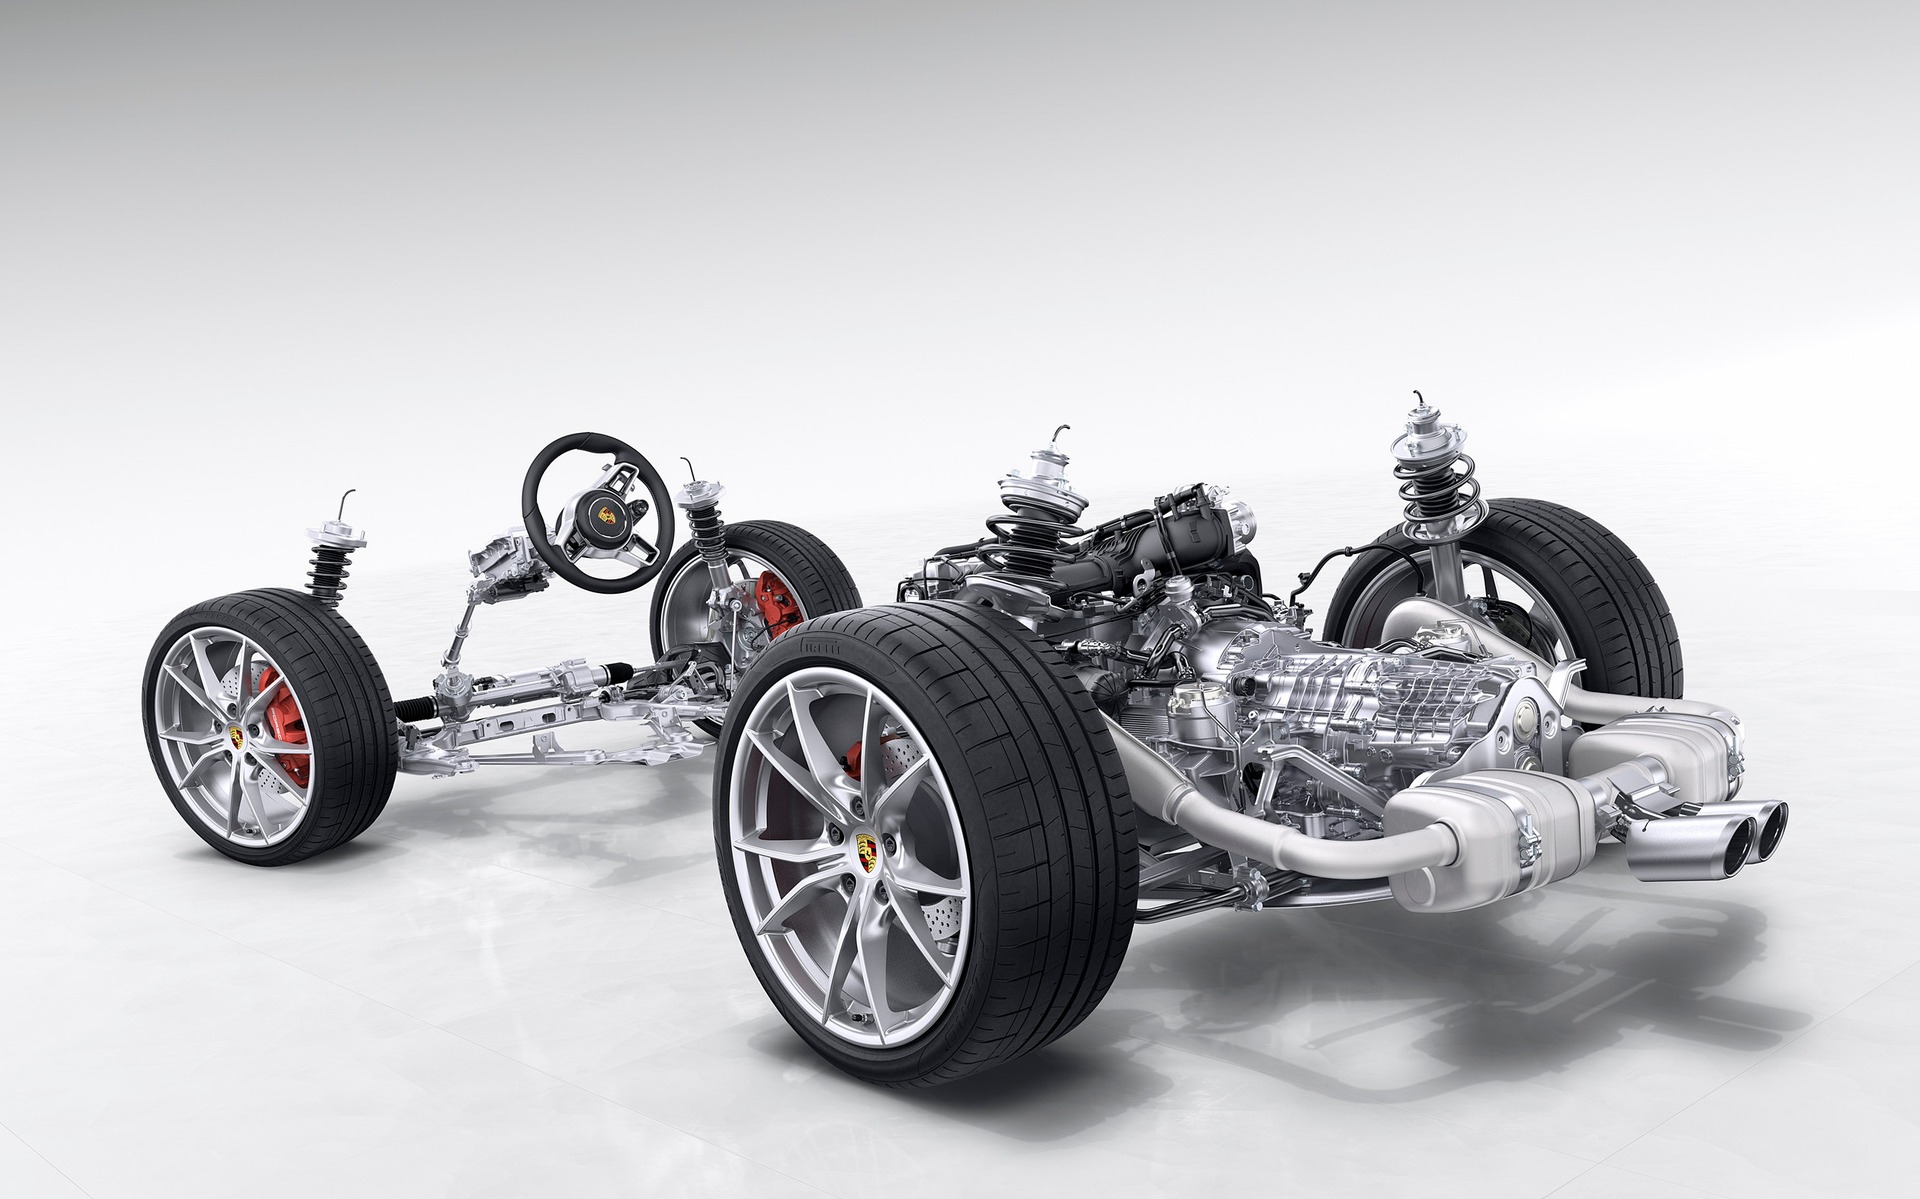 The mid-engine layout of the 2017 Porsche 718 Boxster